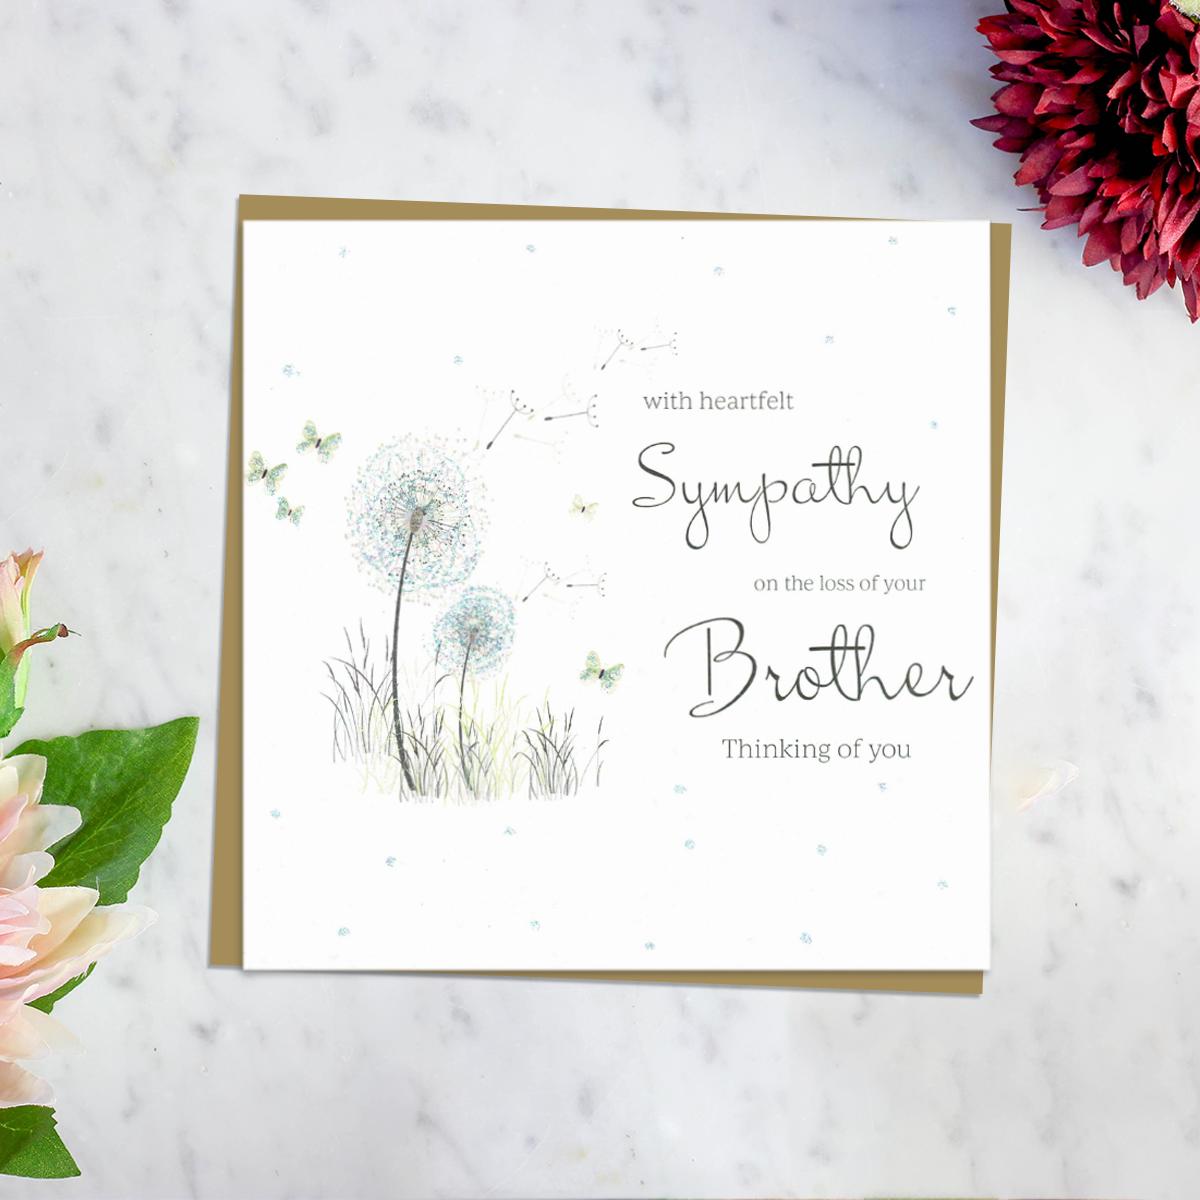 ' With Heartfelt Sympathy On The Loss Of Your Brother Thinking Of You' Card Featuring A Dandelion Blowing In The Wind Surrounded By Butterflies. With Discreet Sparkle and Brown Envelope. Blank Inside For Own Message